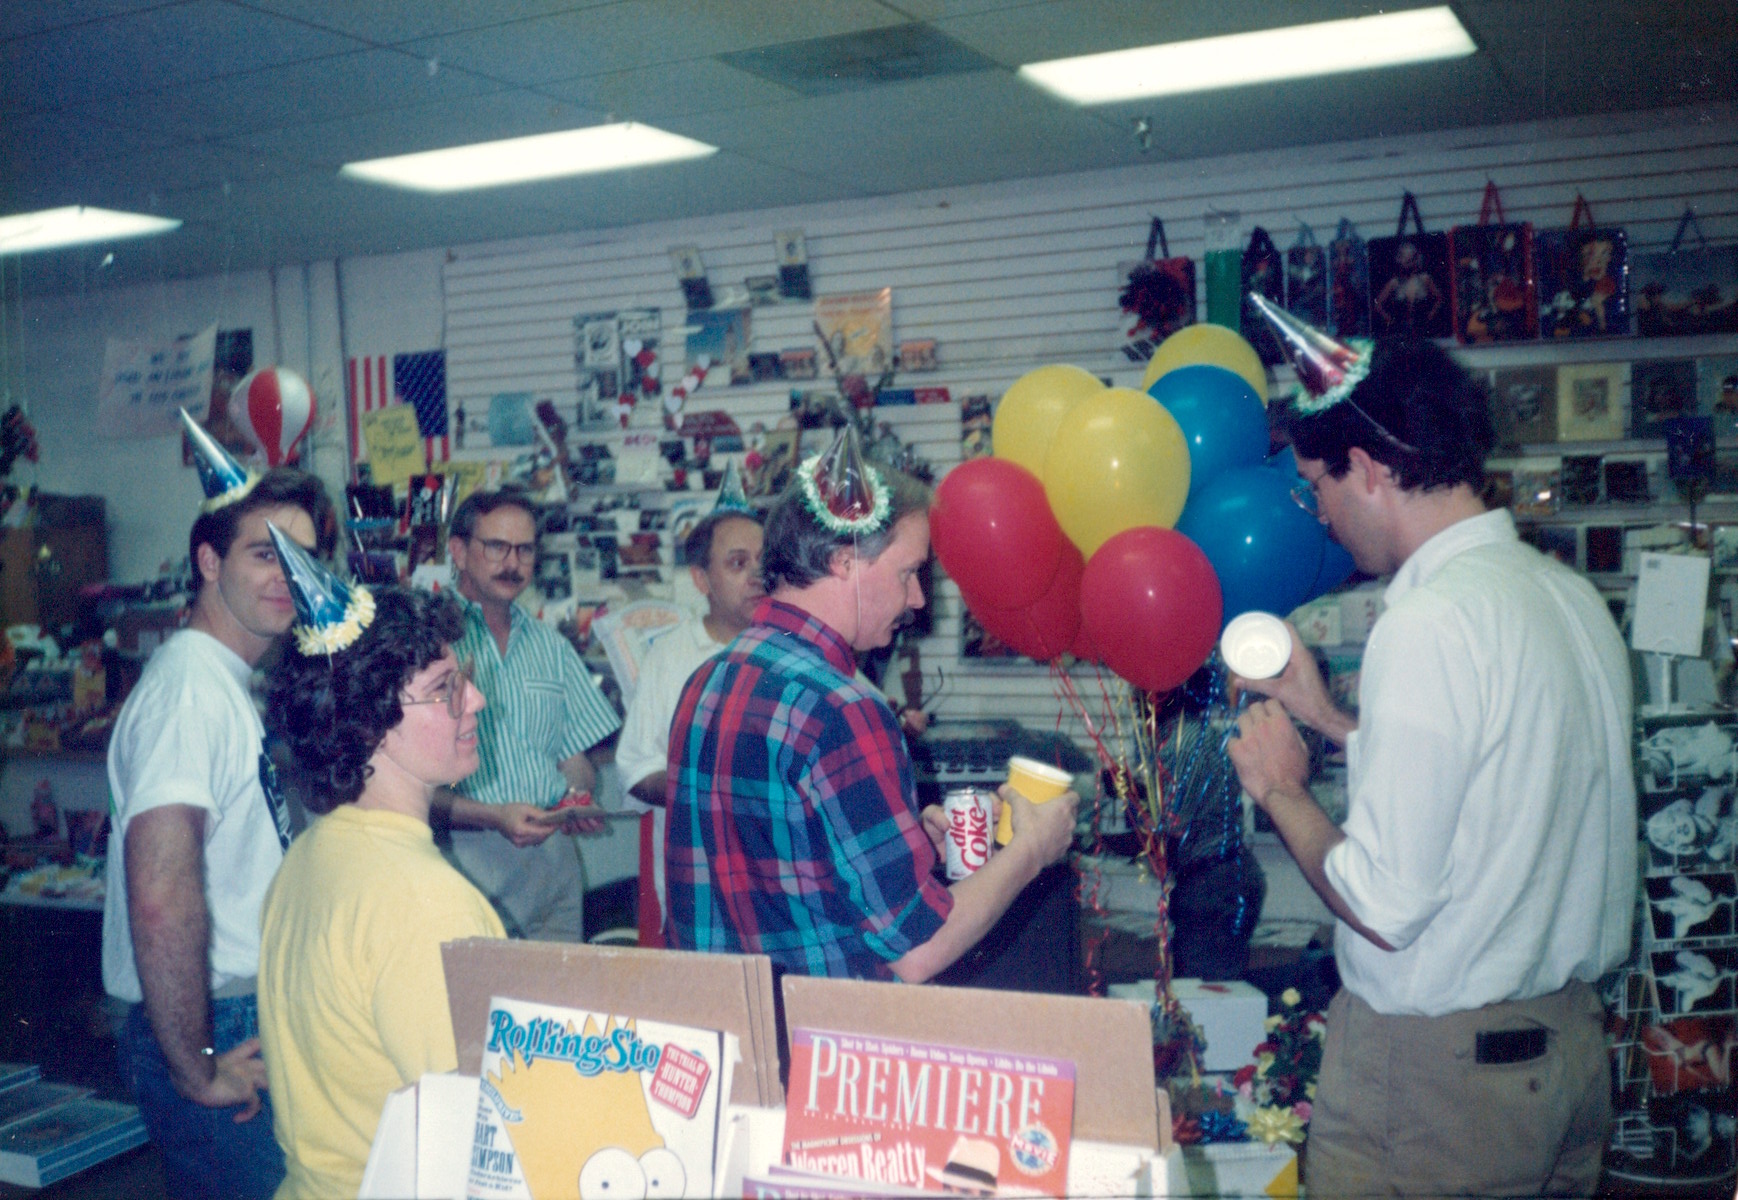 L-R: Charles Longstaff, William Waybourn, Craig Spaulding, and Charles Johnson at the Crossroads Market in Dallas, TX, 1995. William shares, “This was during one of the many Crossroads Market “parties” we held during store hours to liven up things during an otherwise bleak period of AIDS sickness and death.” Photo courtesy of William Waybourn.